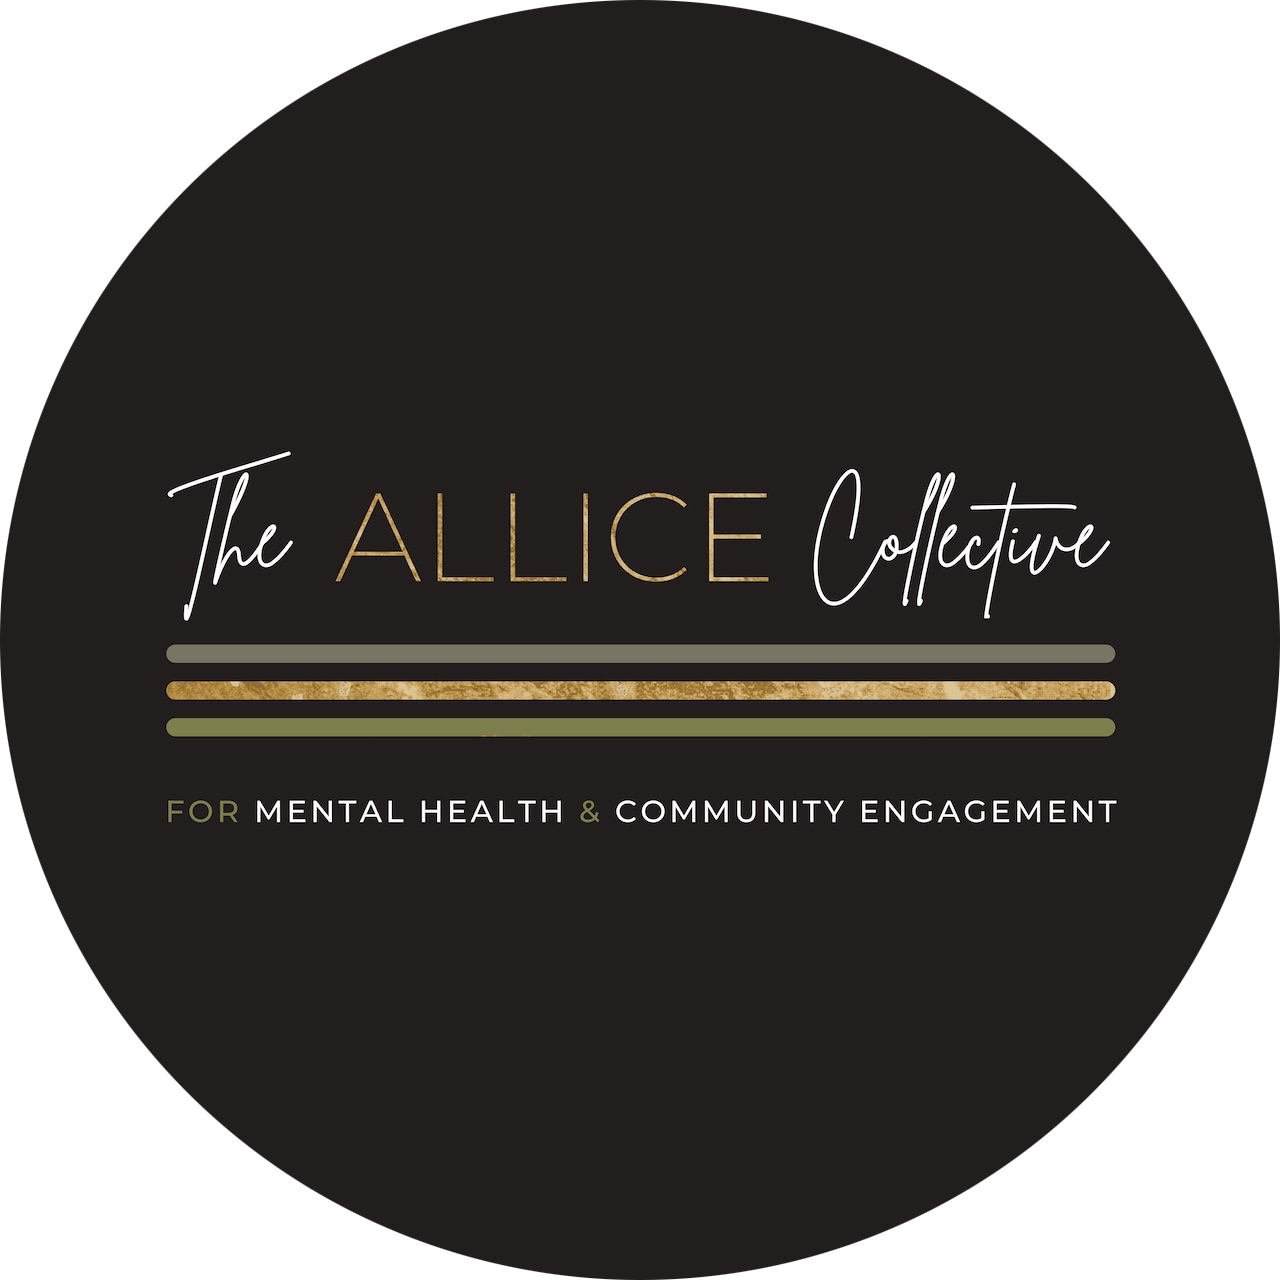 The ALLICE Collective for Mental Health & Community Engagement logo